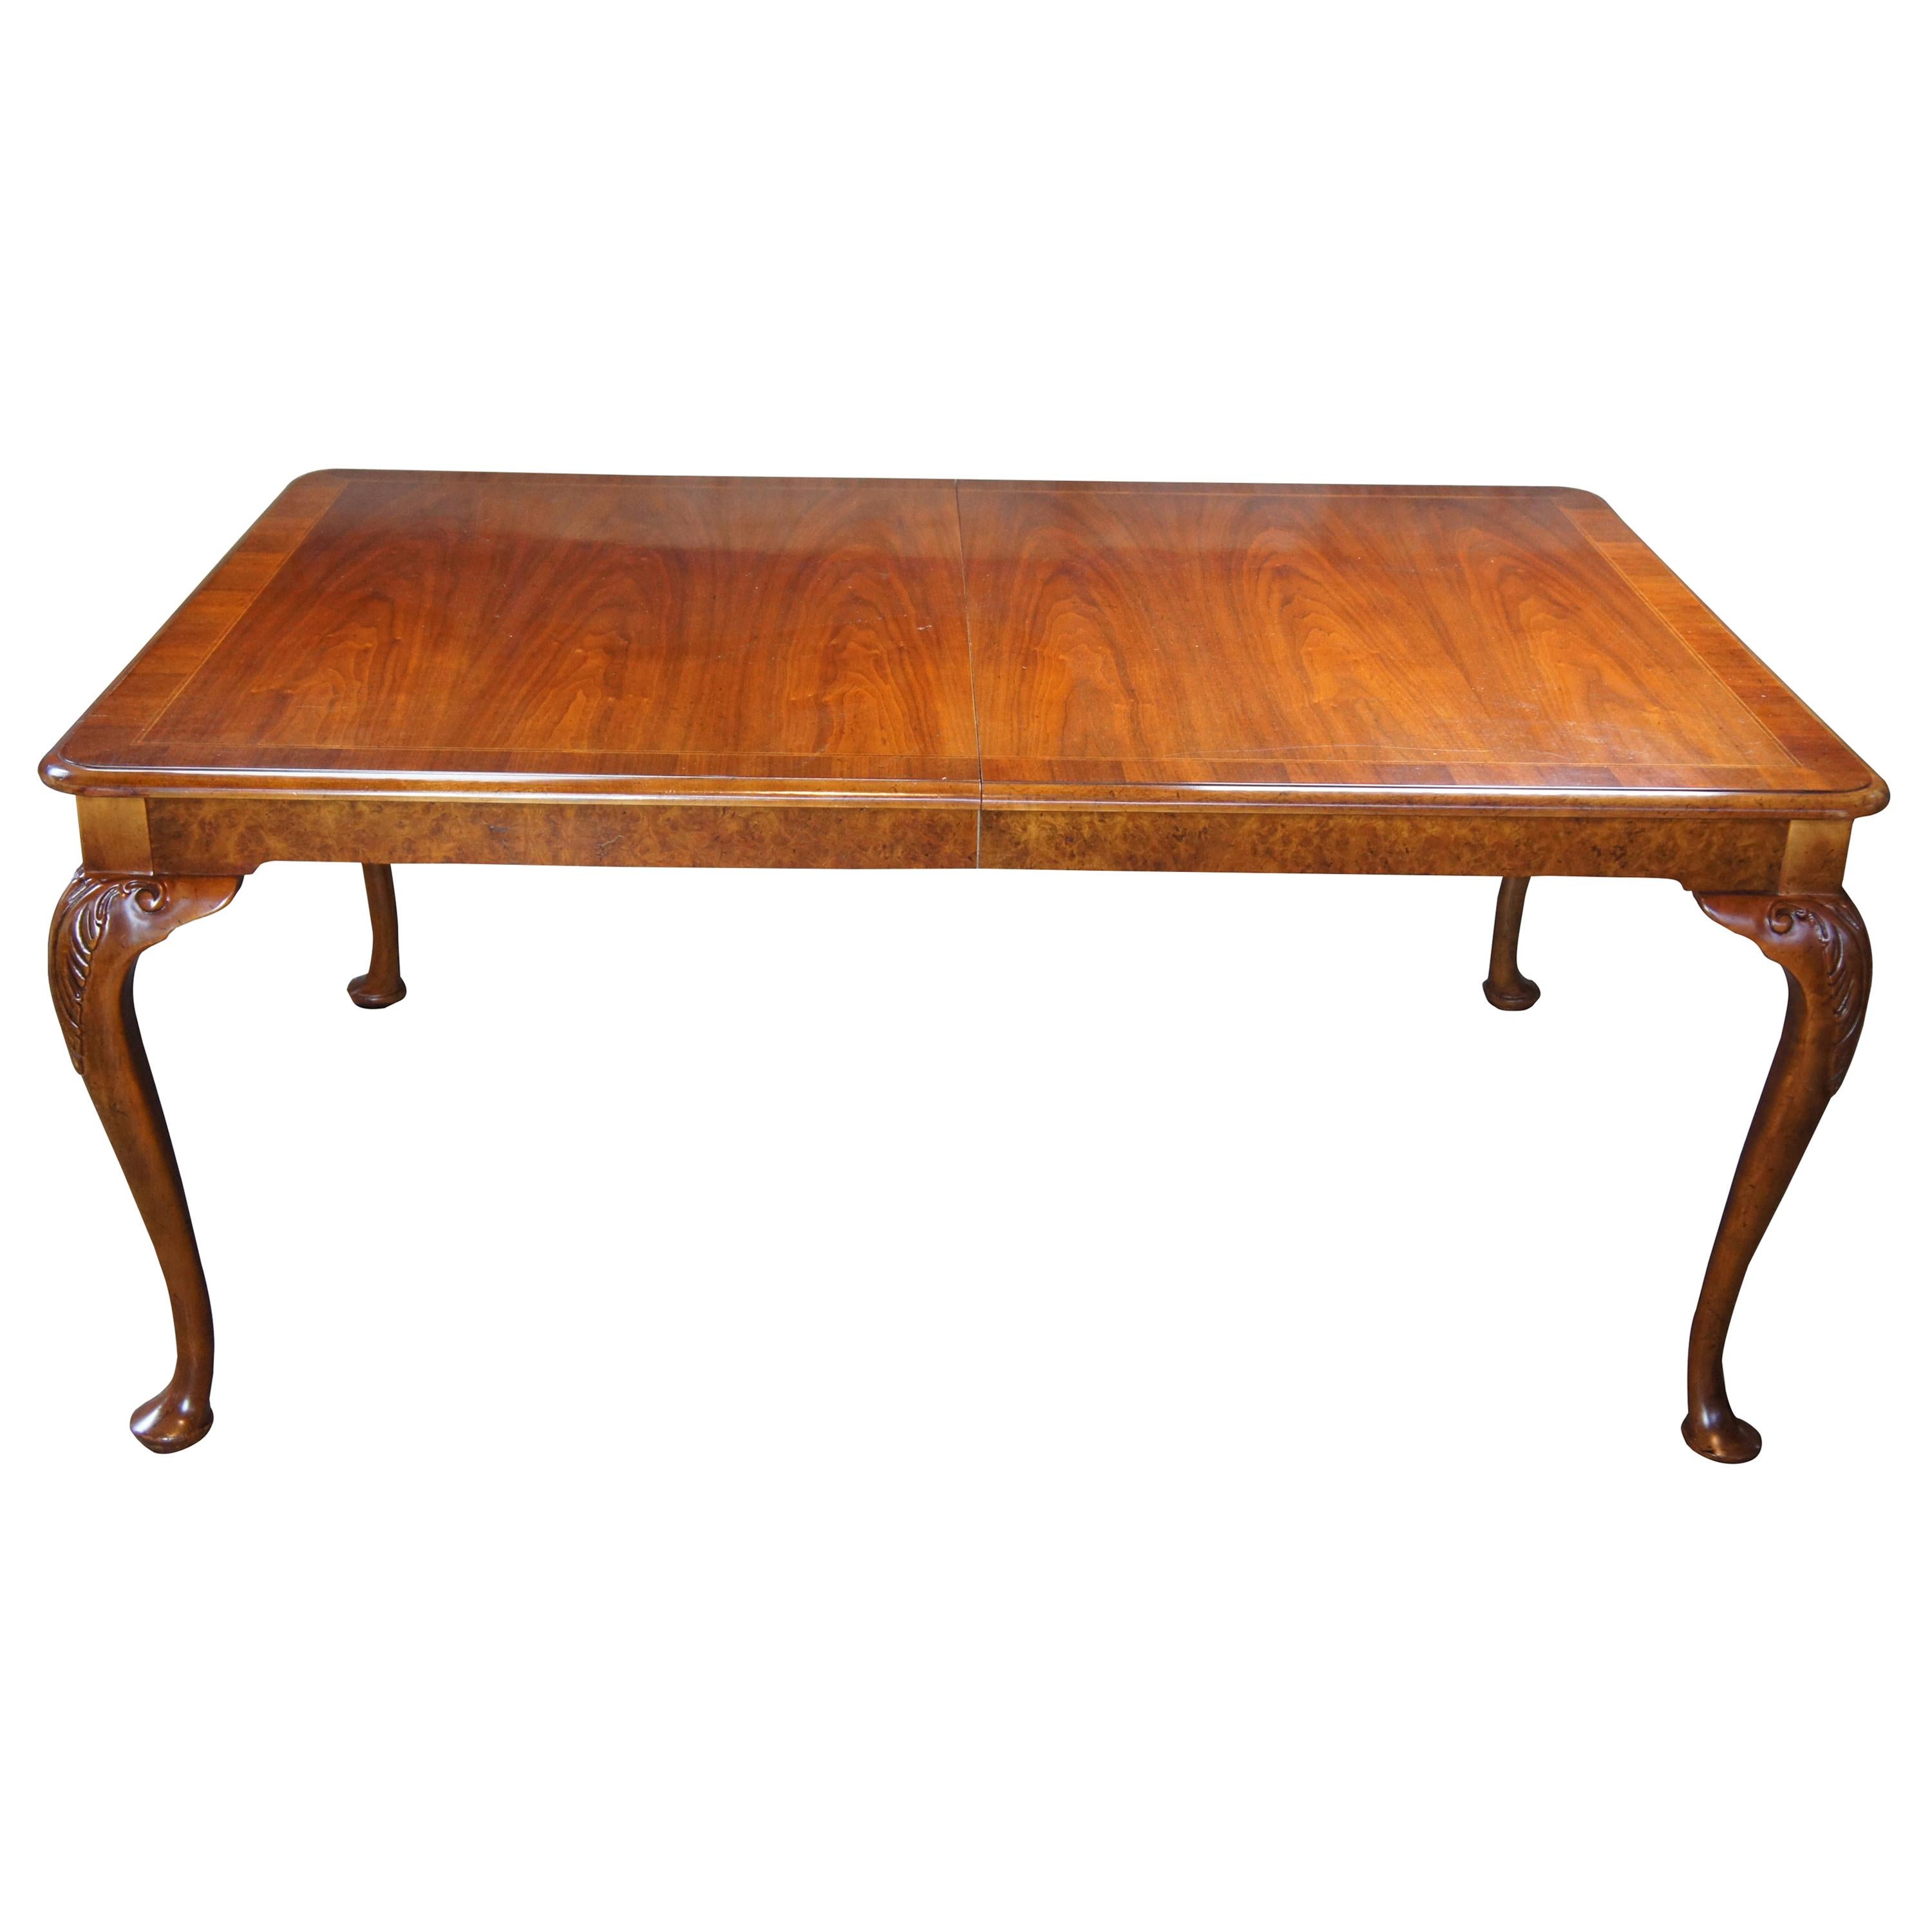 Baker Furniture Walnut Burled Dining Table Traditional Queen Anne Style